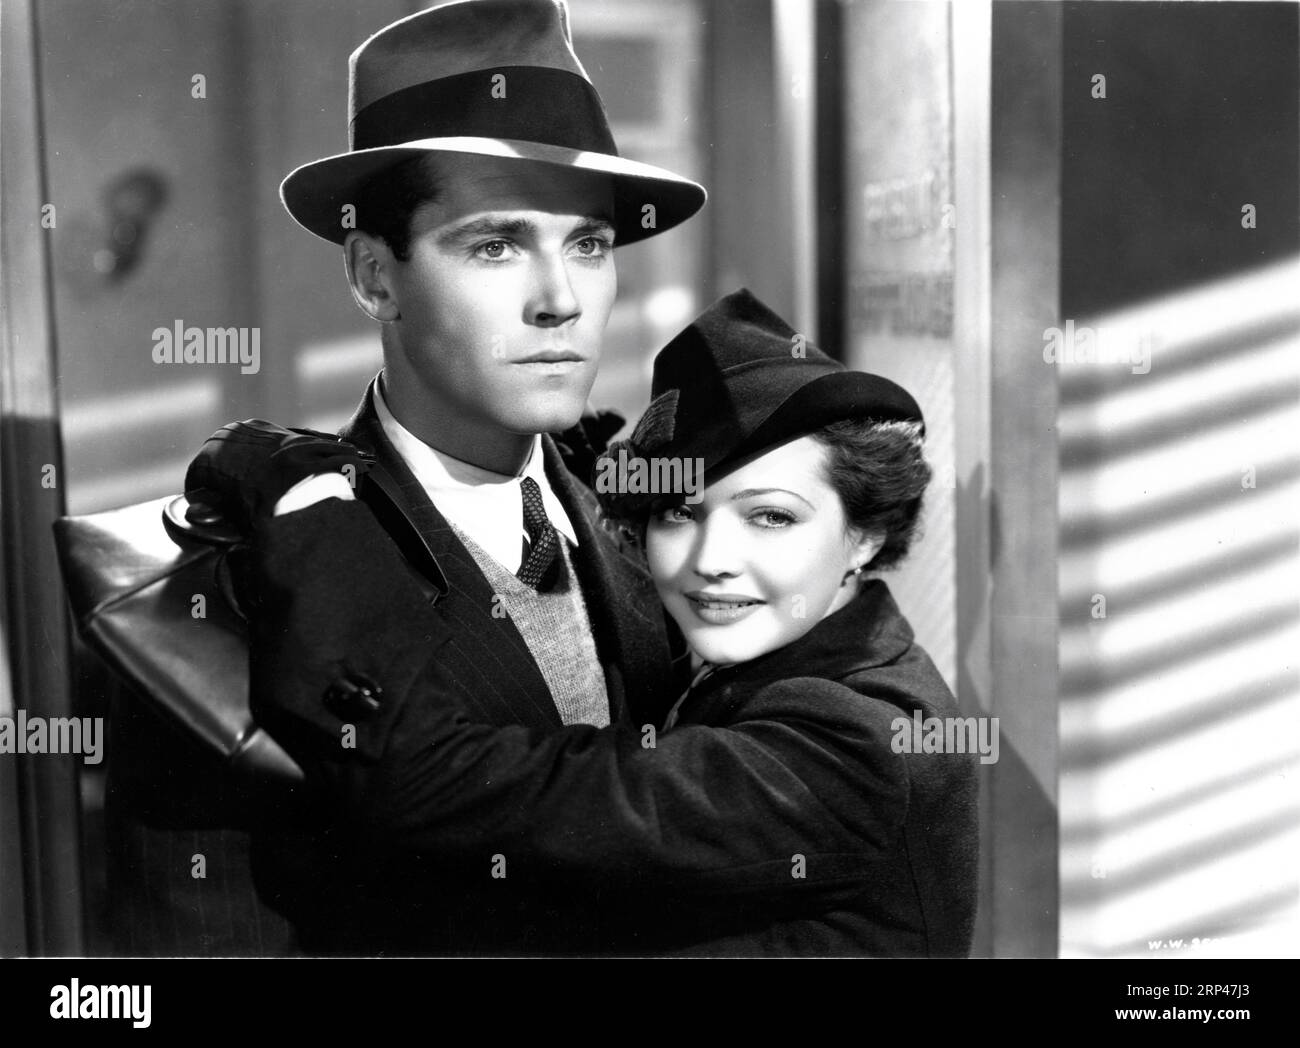 HENRY FONDA and SYLVIA SIDNEY in YOU ONLY LIVE ONCE 1937 director FRITZ LANG screenplay Gene Towne and C. Graham Baker music Alfred Newman costume design Helen Taylor Walter Wanger Productions / United Artists Stock Photo